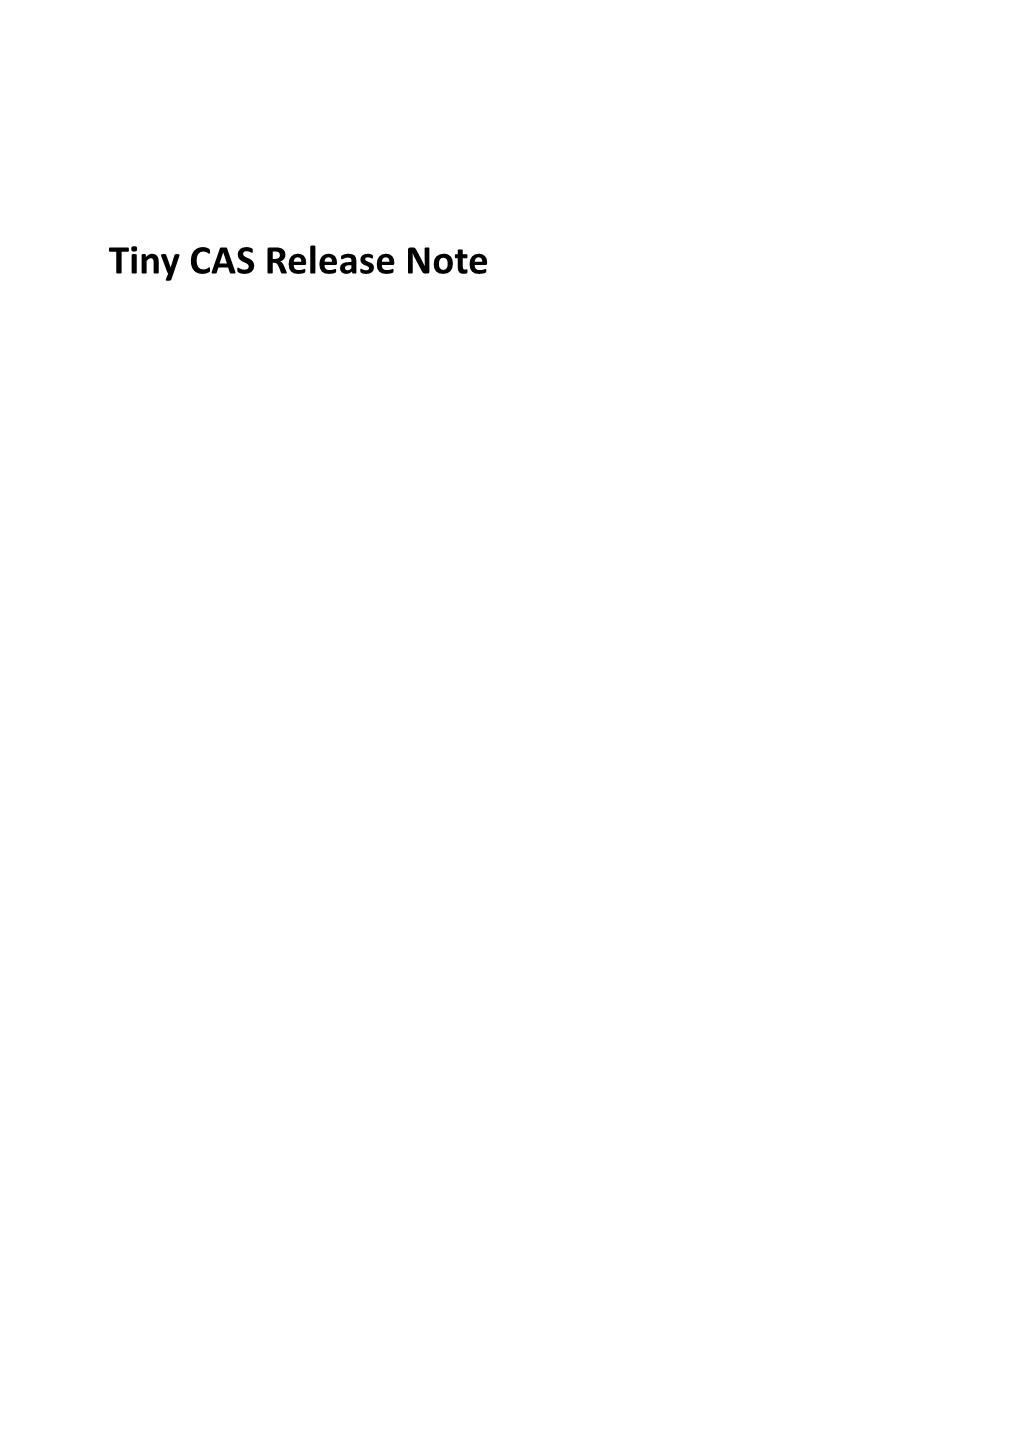 Tiny CAS Release Note